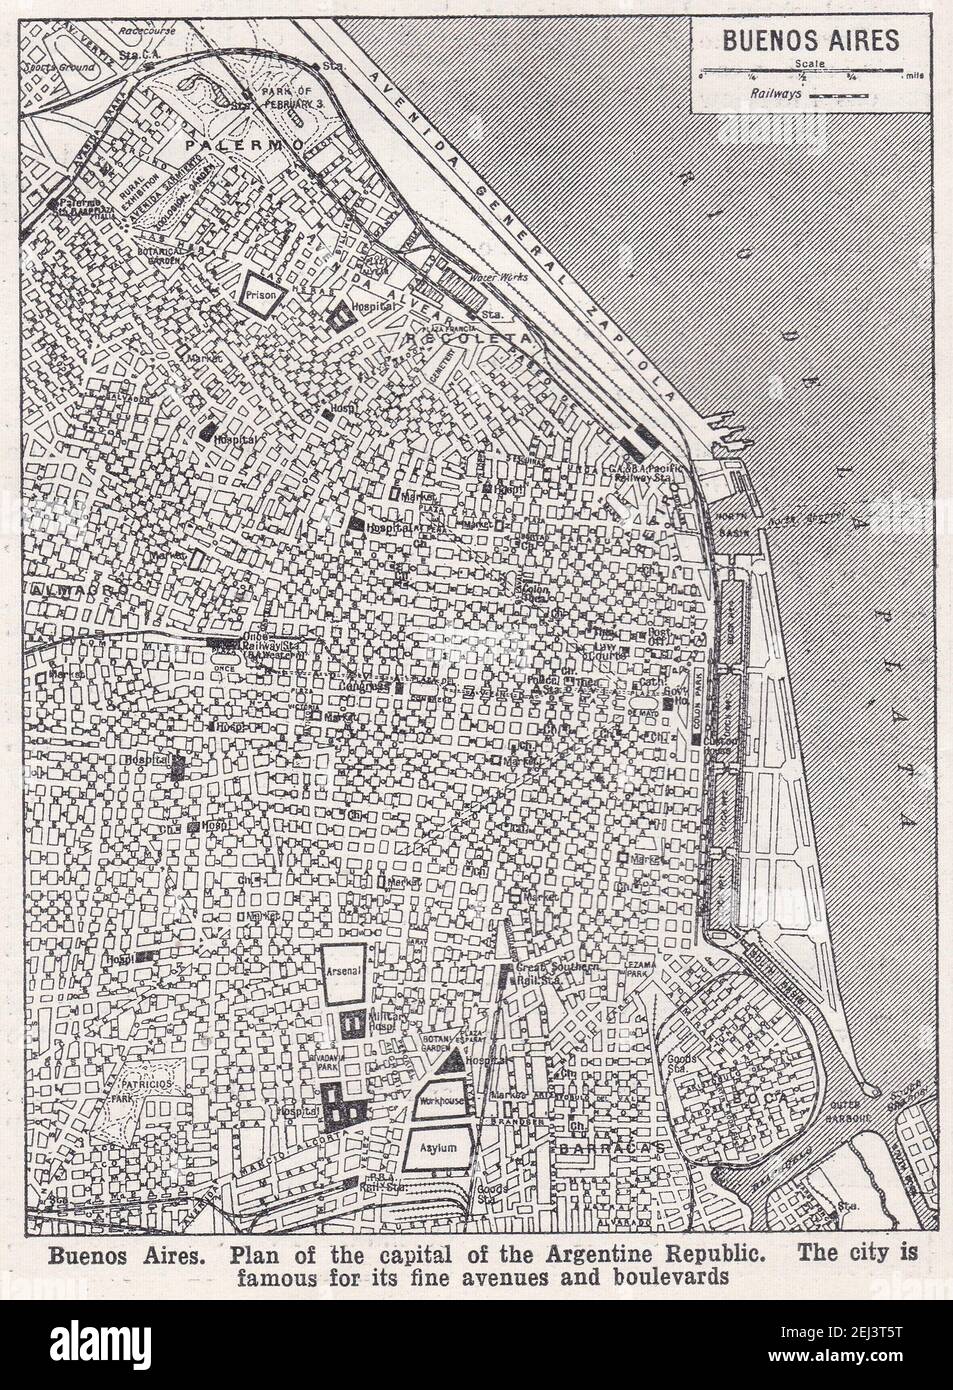 Vintage map of Buenos Aires - Plan of the capital of the Argentine Republic 1900s. Stock Photo